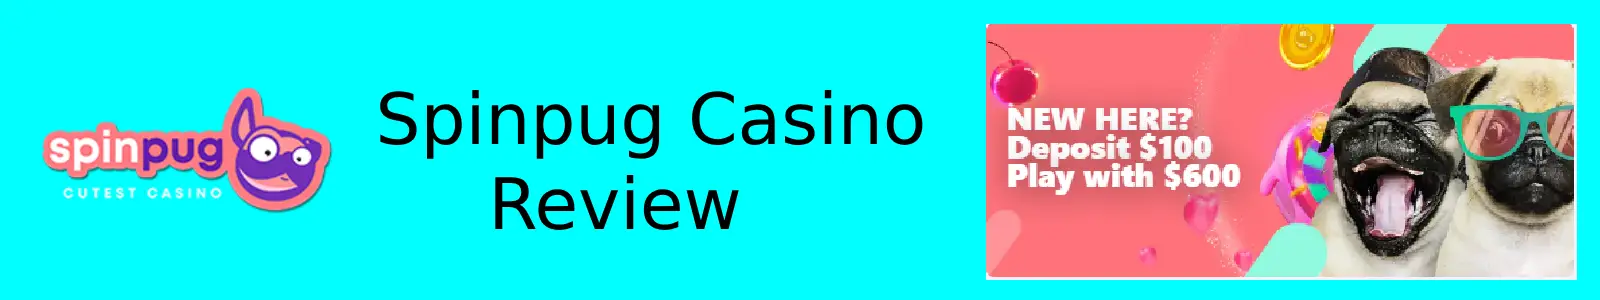 Spin pug Casino Welcome